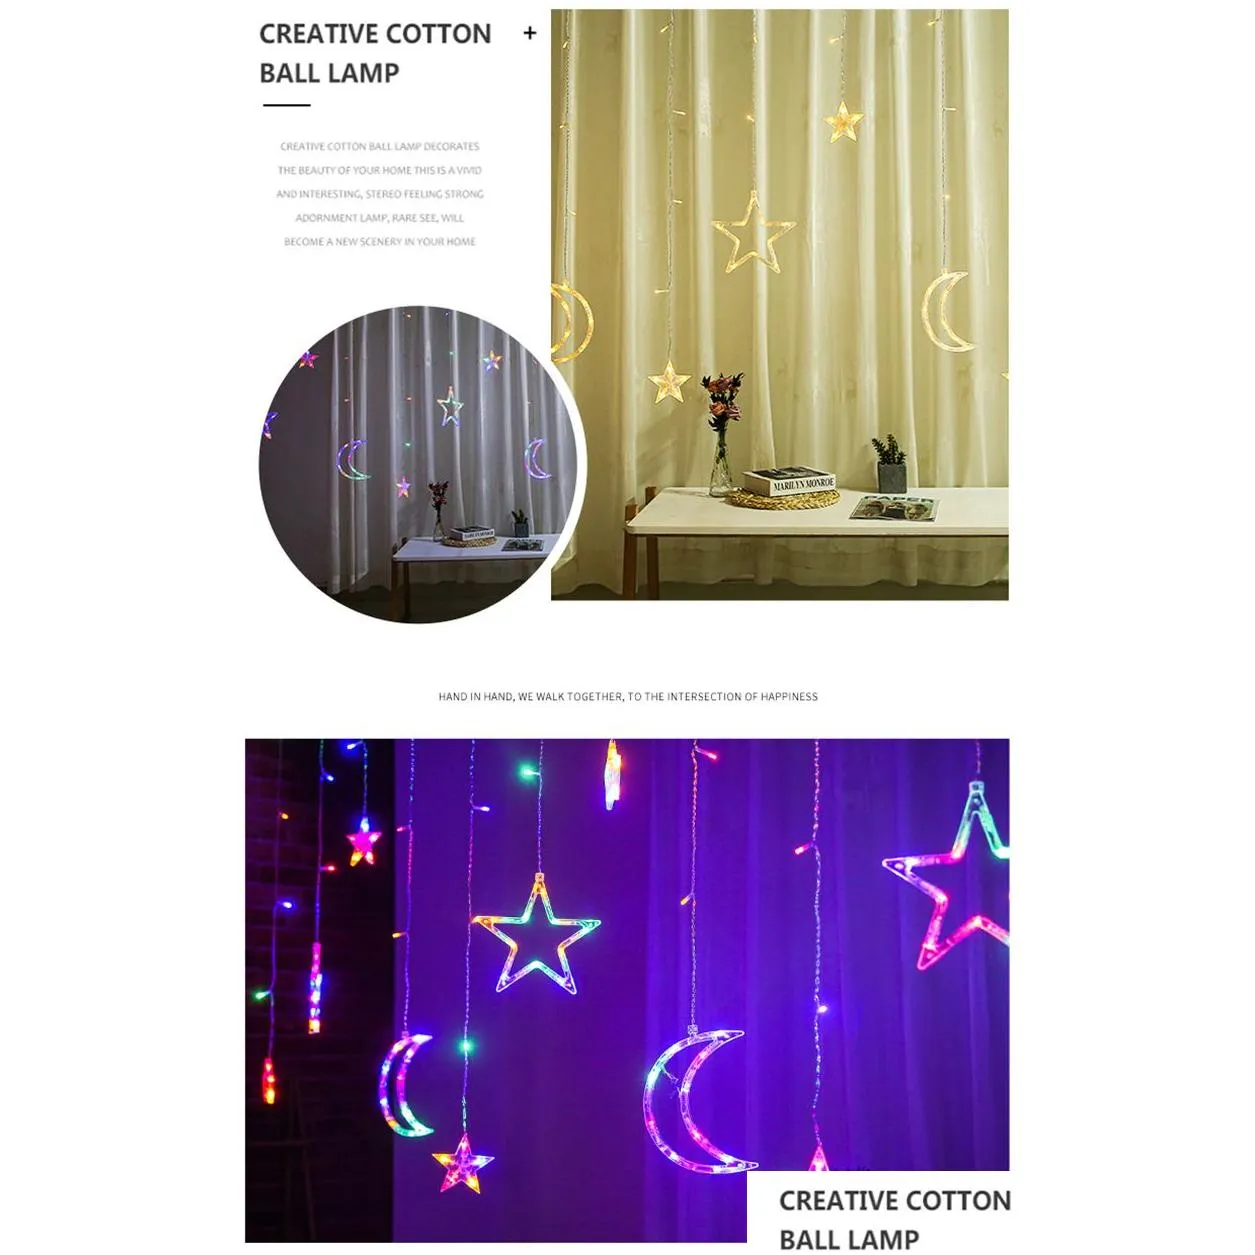 Solar LED Light String Curtain Romantic Rope Lights With Remote Control Outdoor Star Garland Moon Lamp Bar Home Decoration Party Christmas